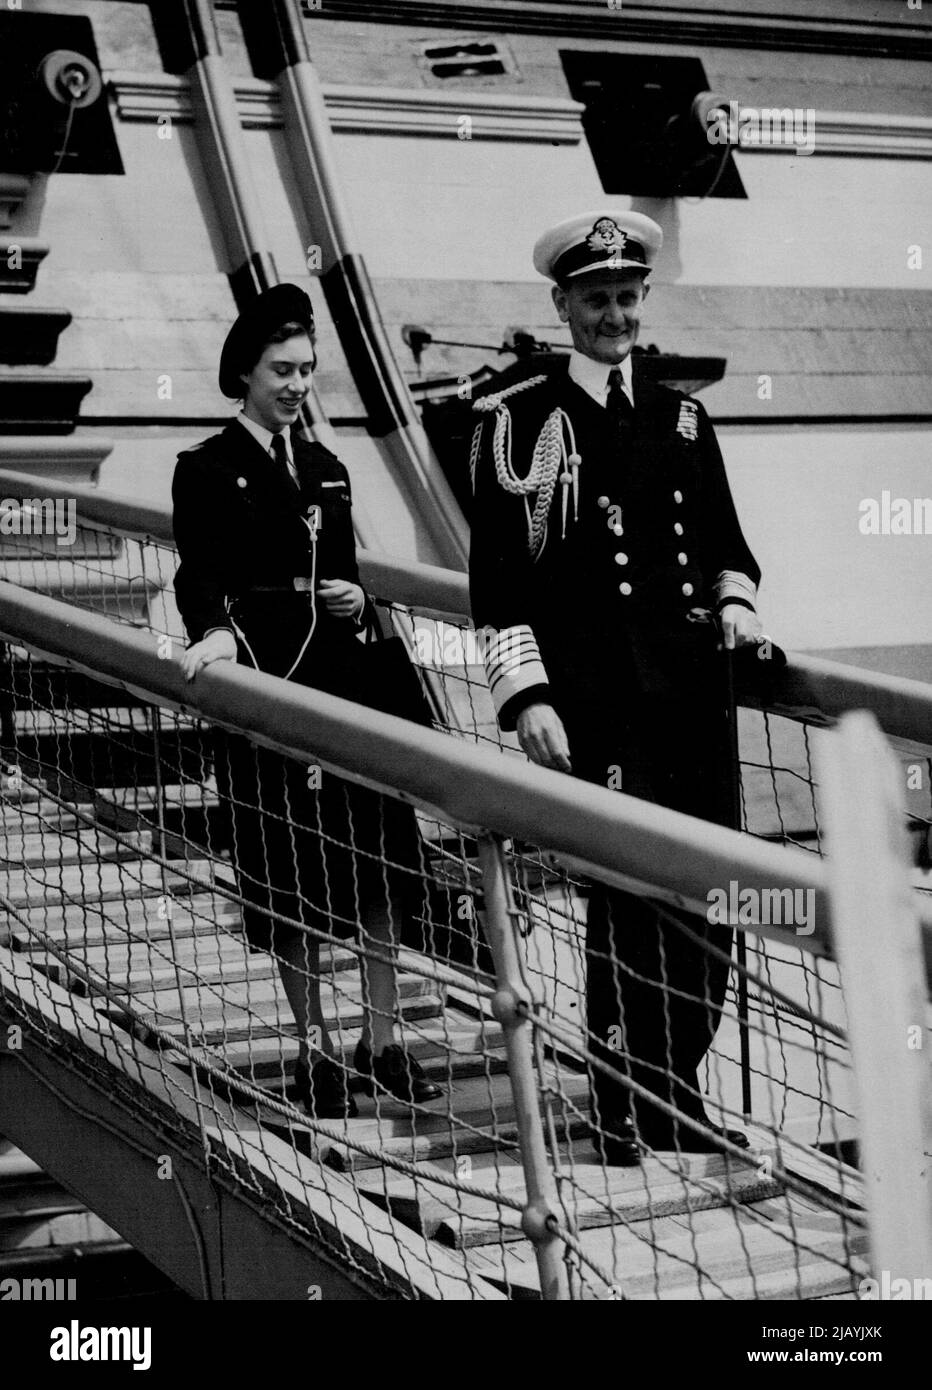 Sea Ranger Row The Princess -- Princess Margaret had a day with the Sea Rangers yesterday. As their Commodore, she went to Portsmouth to inspect 100 girls doing seamanship training aboard the training ship Foudroyant. Ships in the harbour were dressed overall as the Princess, in Sea Rangers' uniforms was rowed out to the 133-year-old man-o'-war in a boat manned by six Sea Rangers. She had tea in the ship. Later she visited Gosport and drove through the borough before returning to London by road. May 22, 1950. (Photo by Daily Mirror) Stock Photo